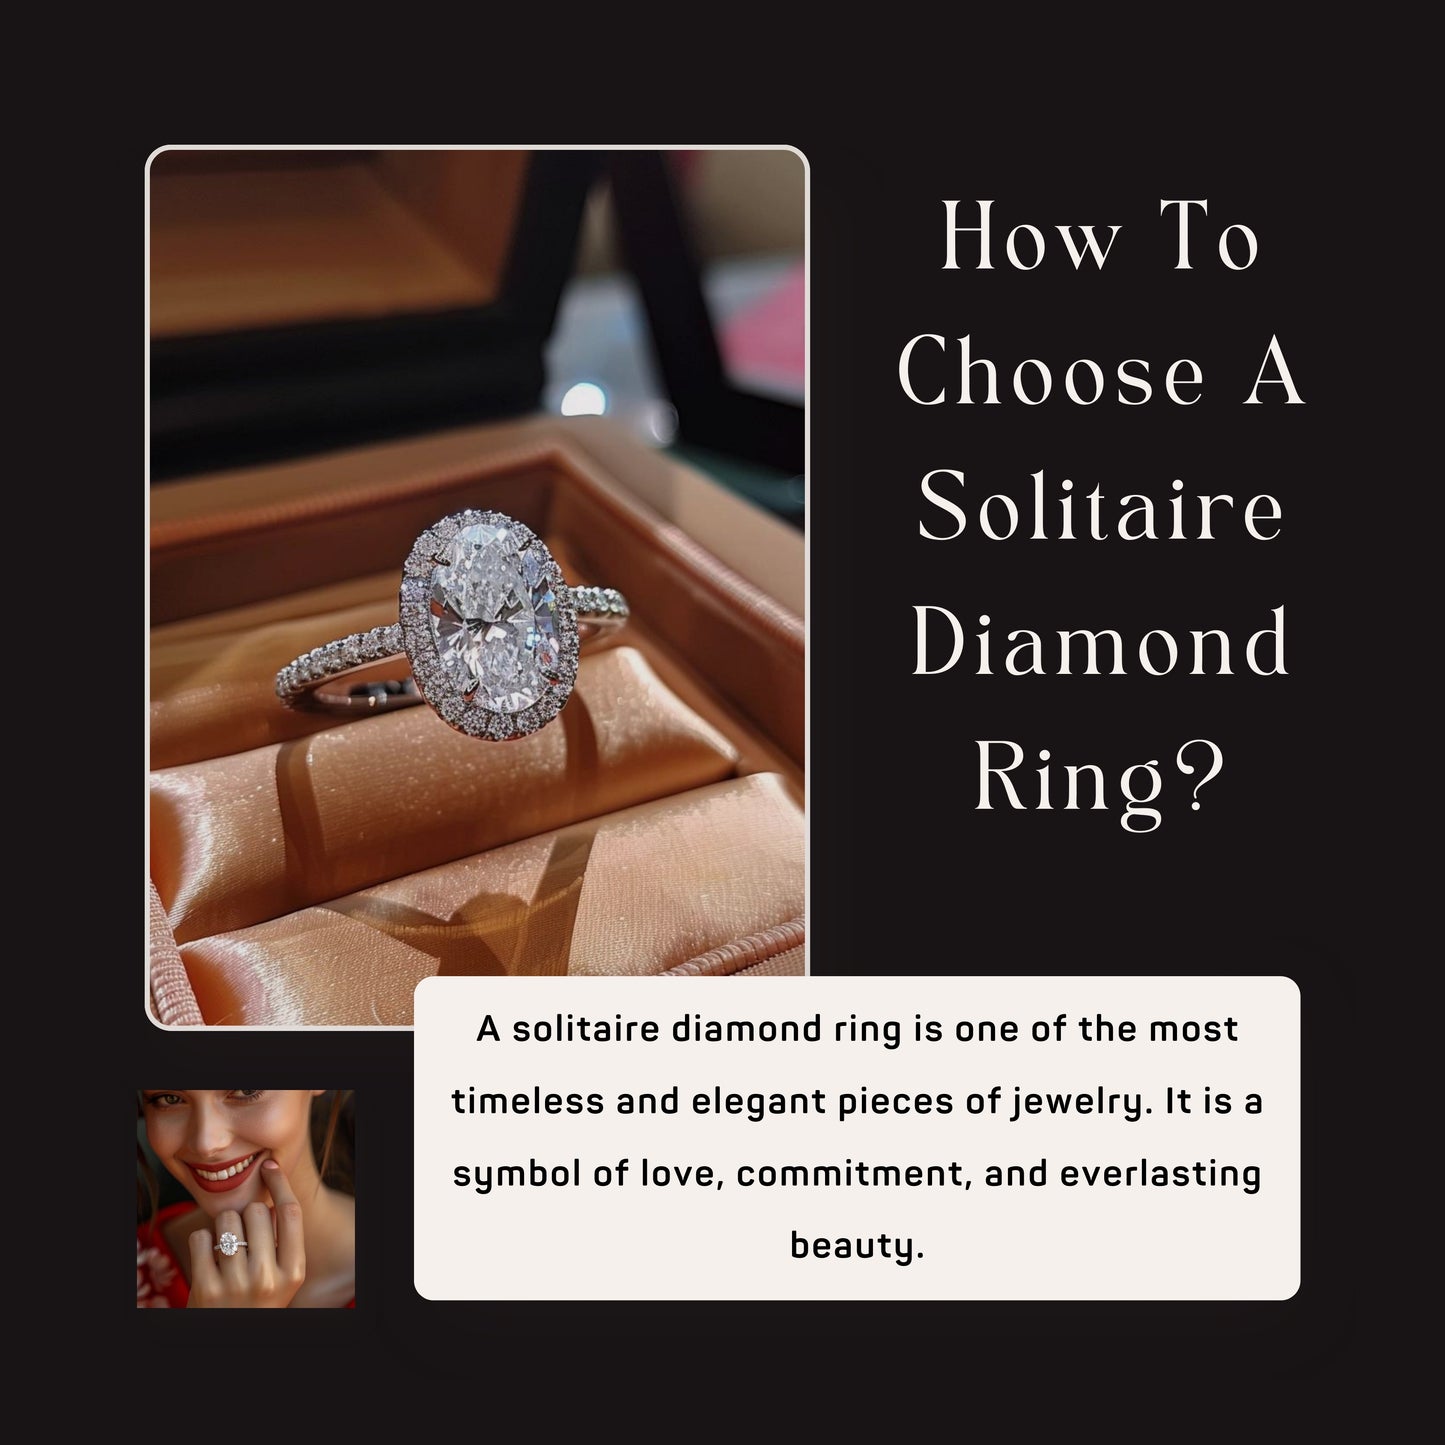 How To Choose A Solitaire Diamond Ring?